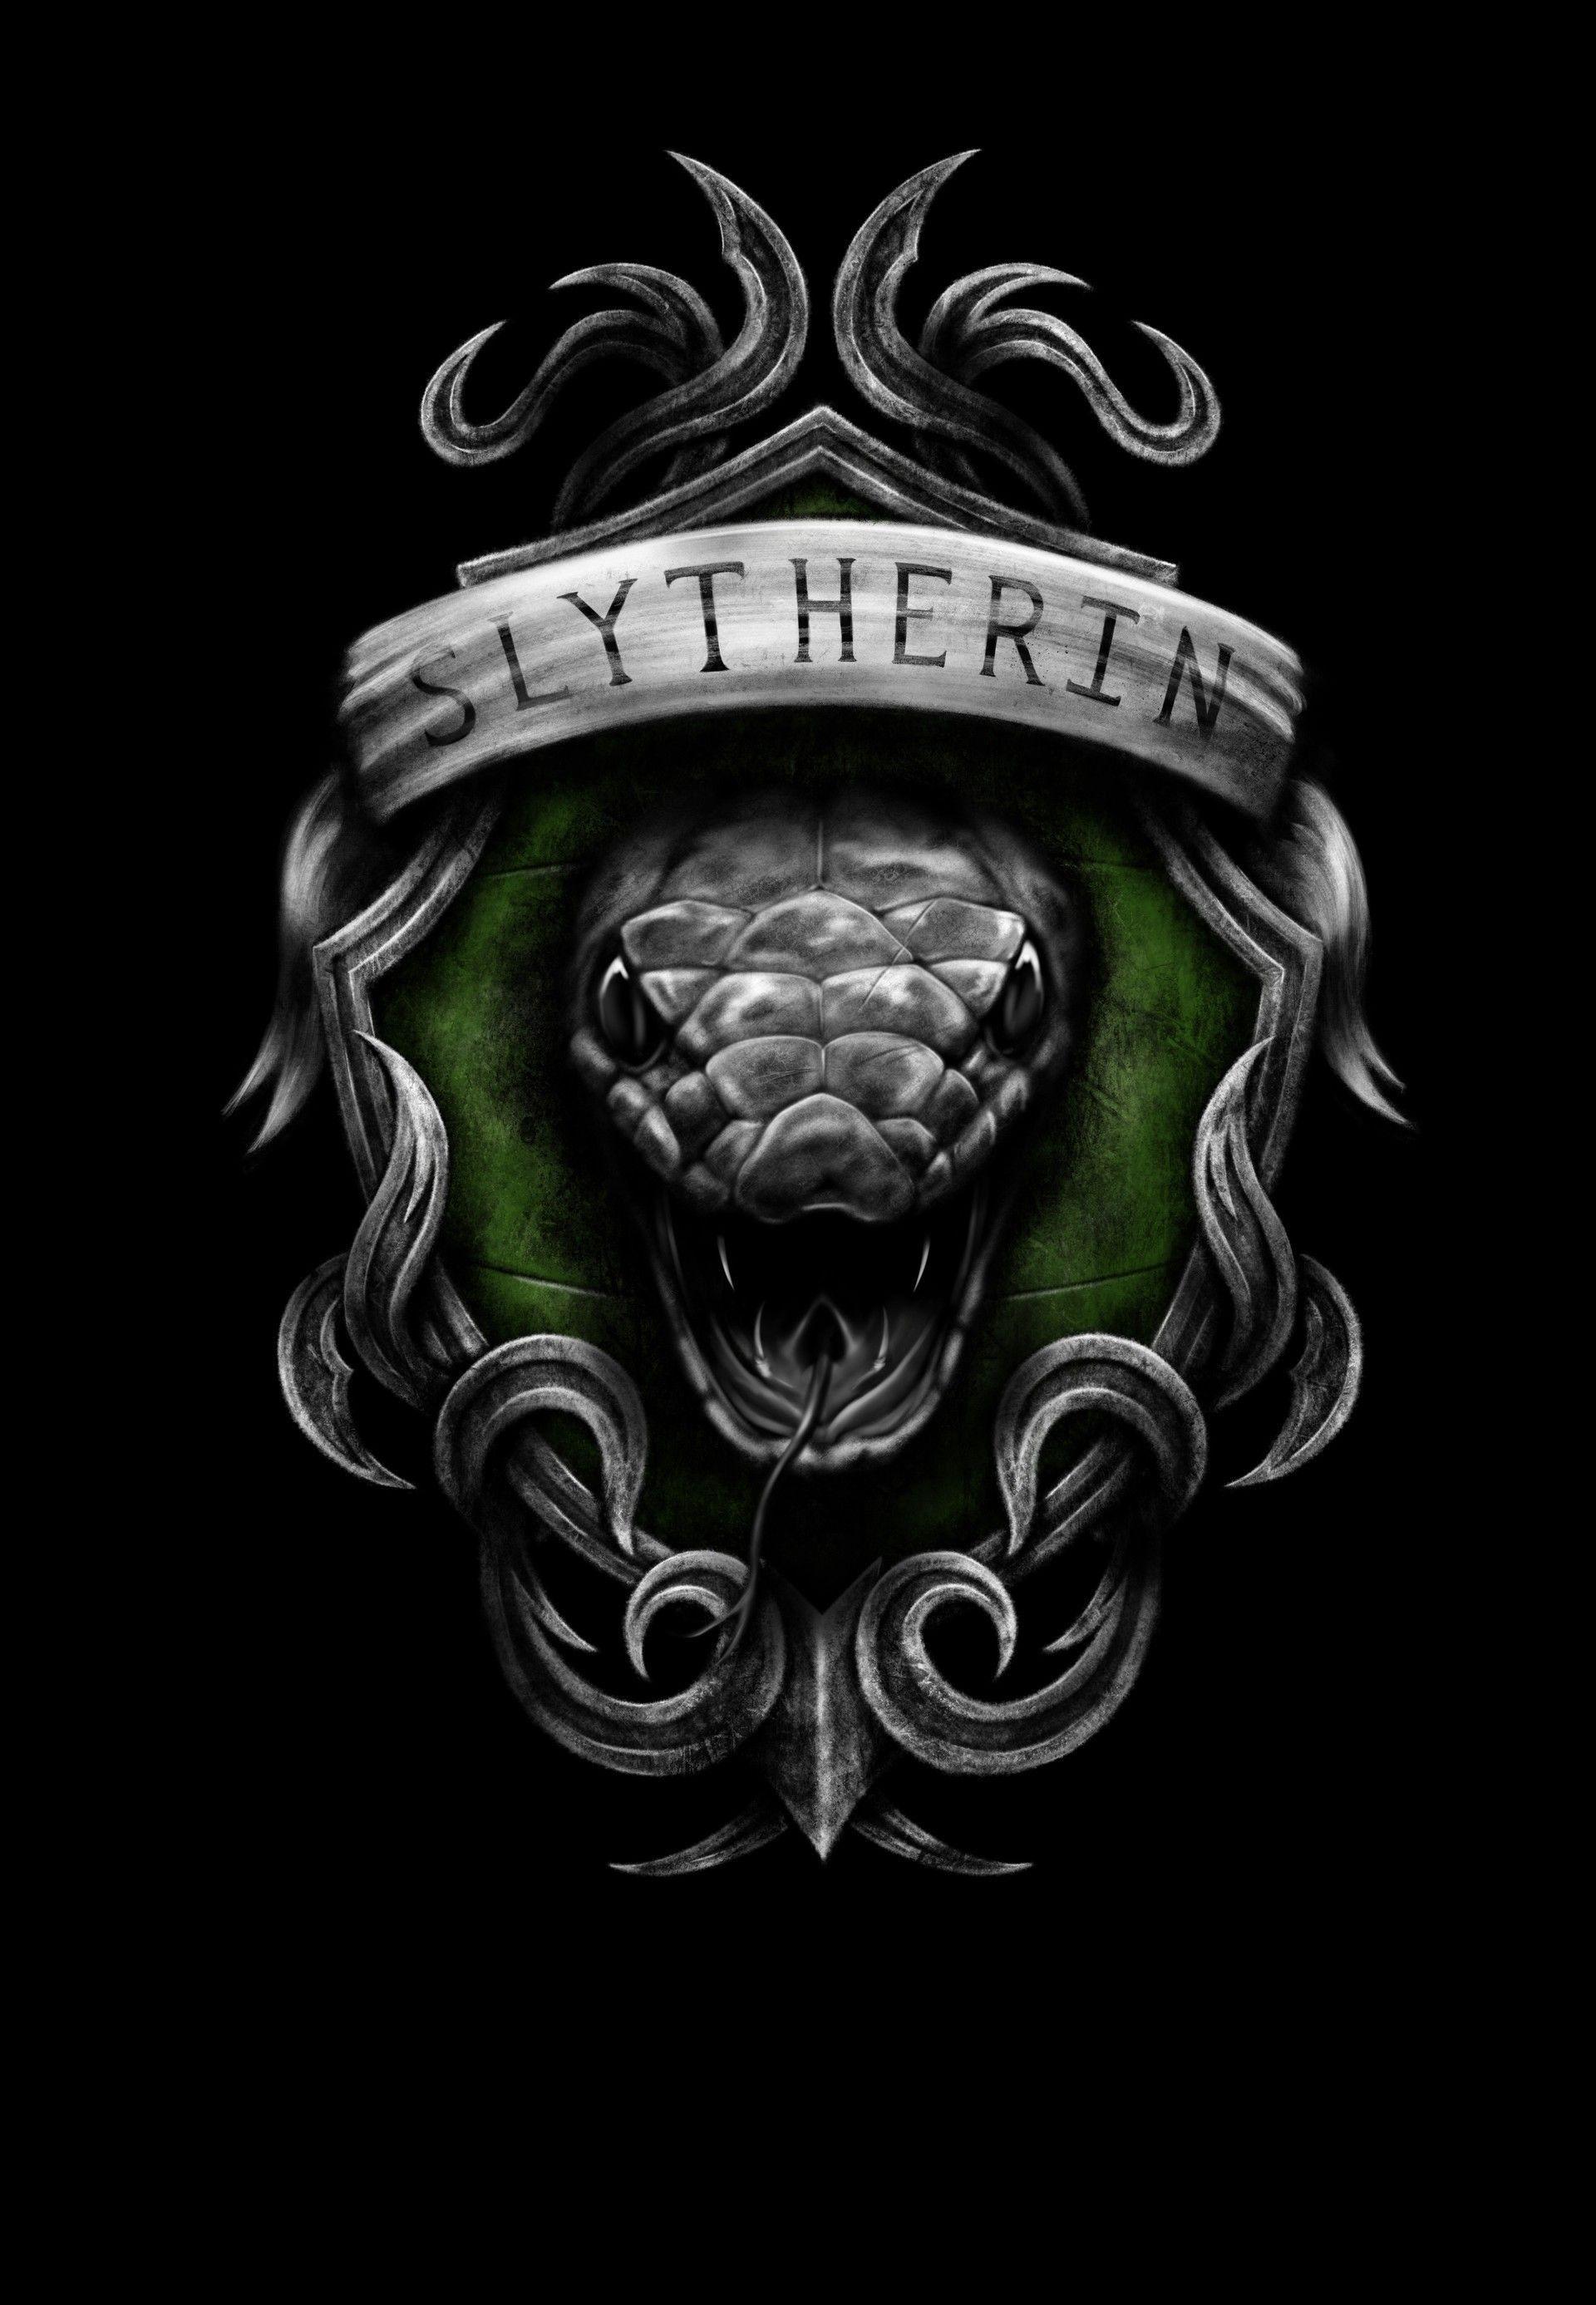 Slytherin iPhone Wallpaper. Harry potter